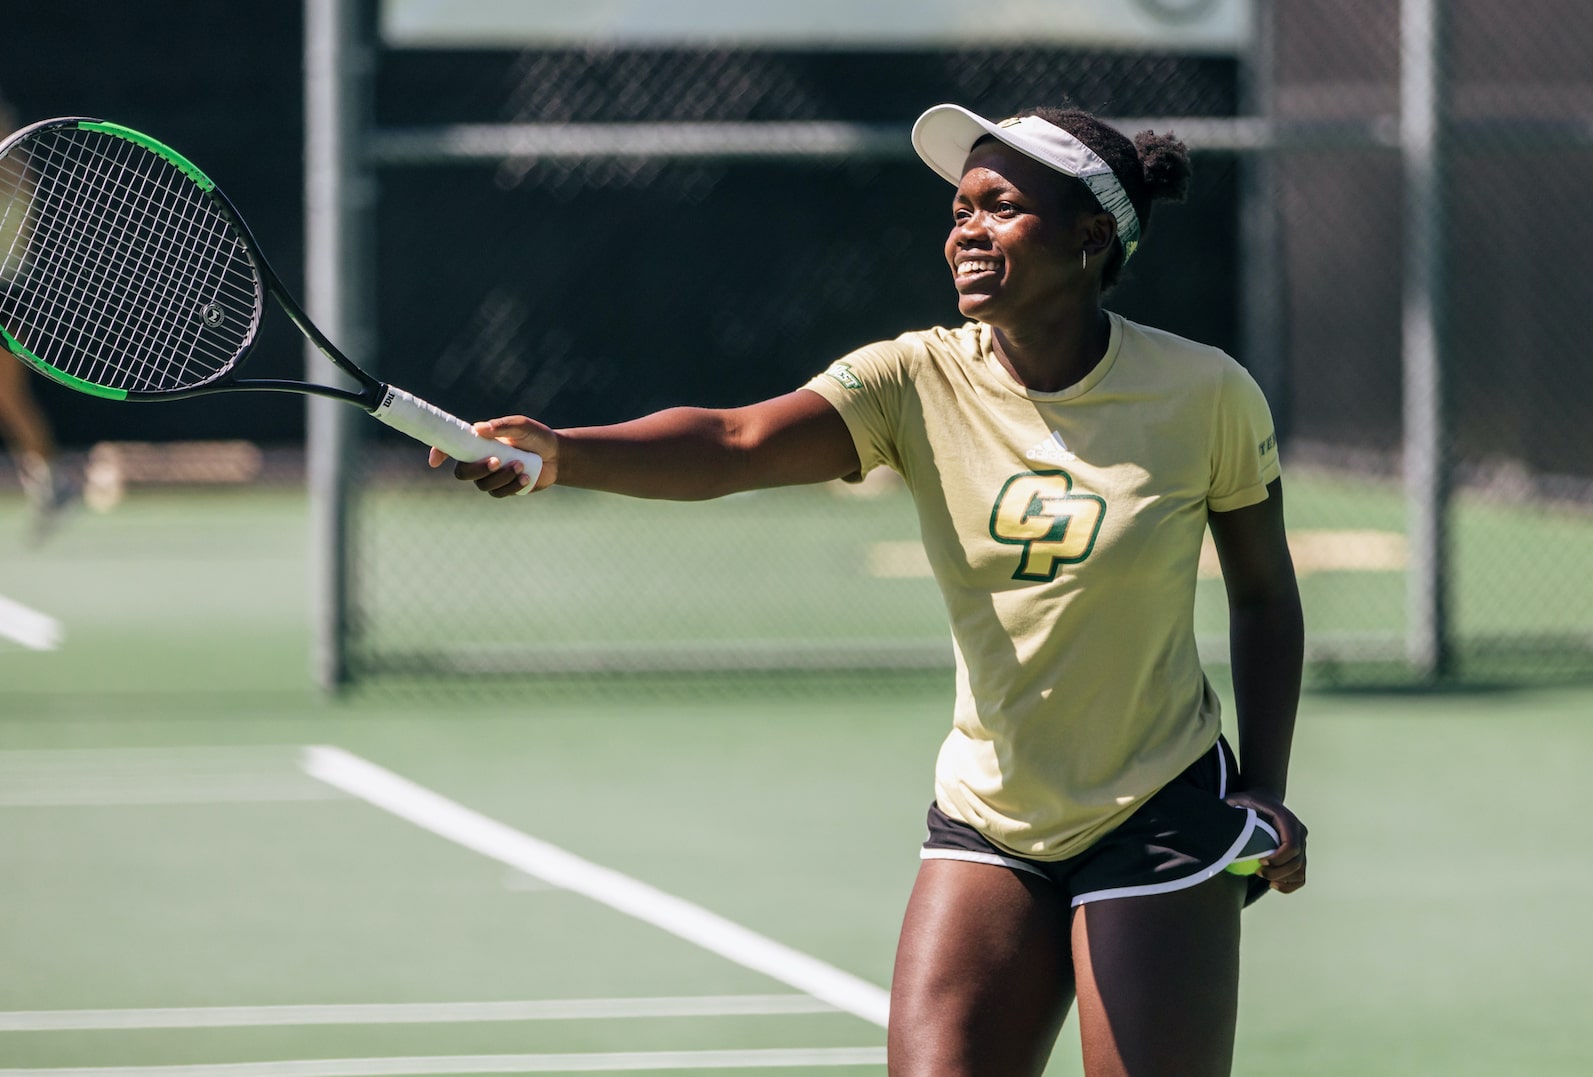 Member of Cal Poly women's tennis team in yellow shirt and green shorts on the court